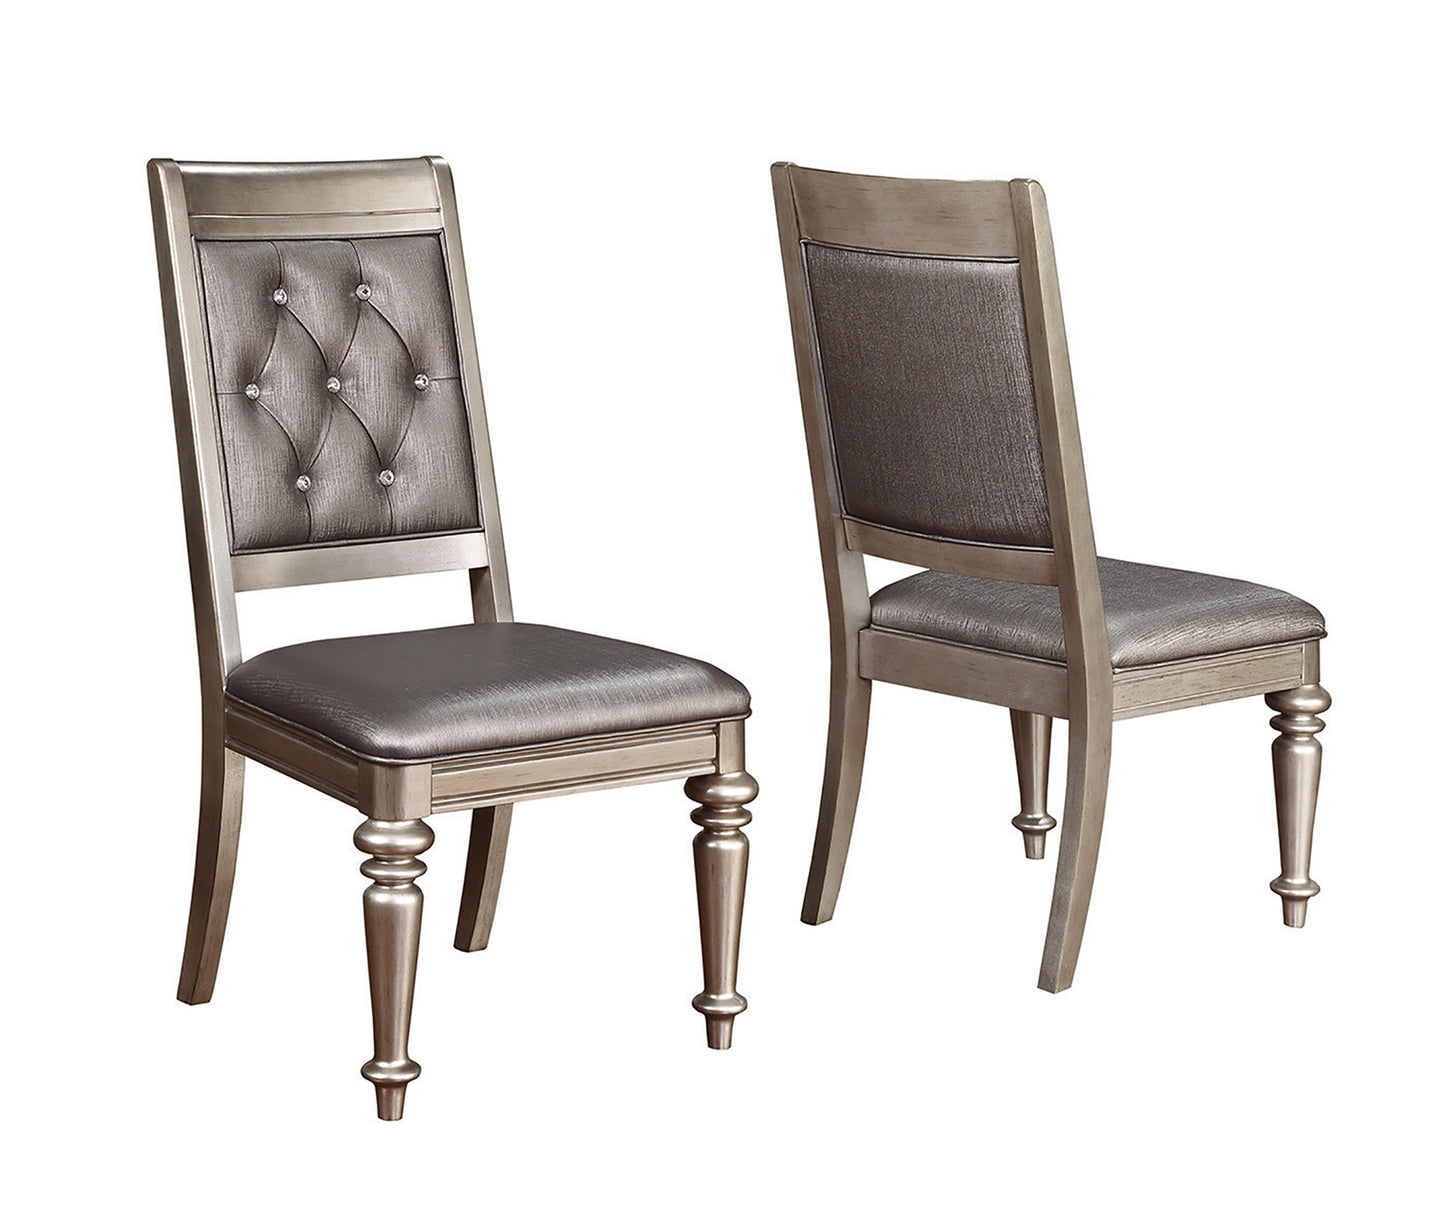 Danette Open Back Arm Chairs Metallic Set Of 2